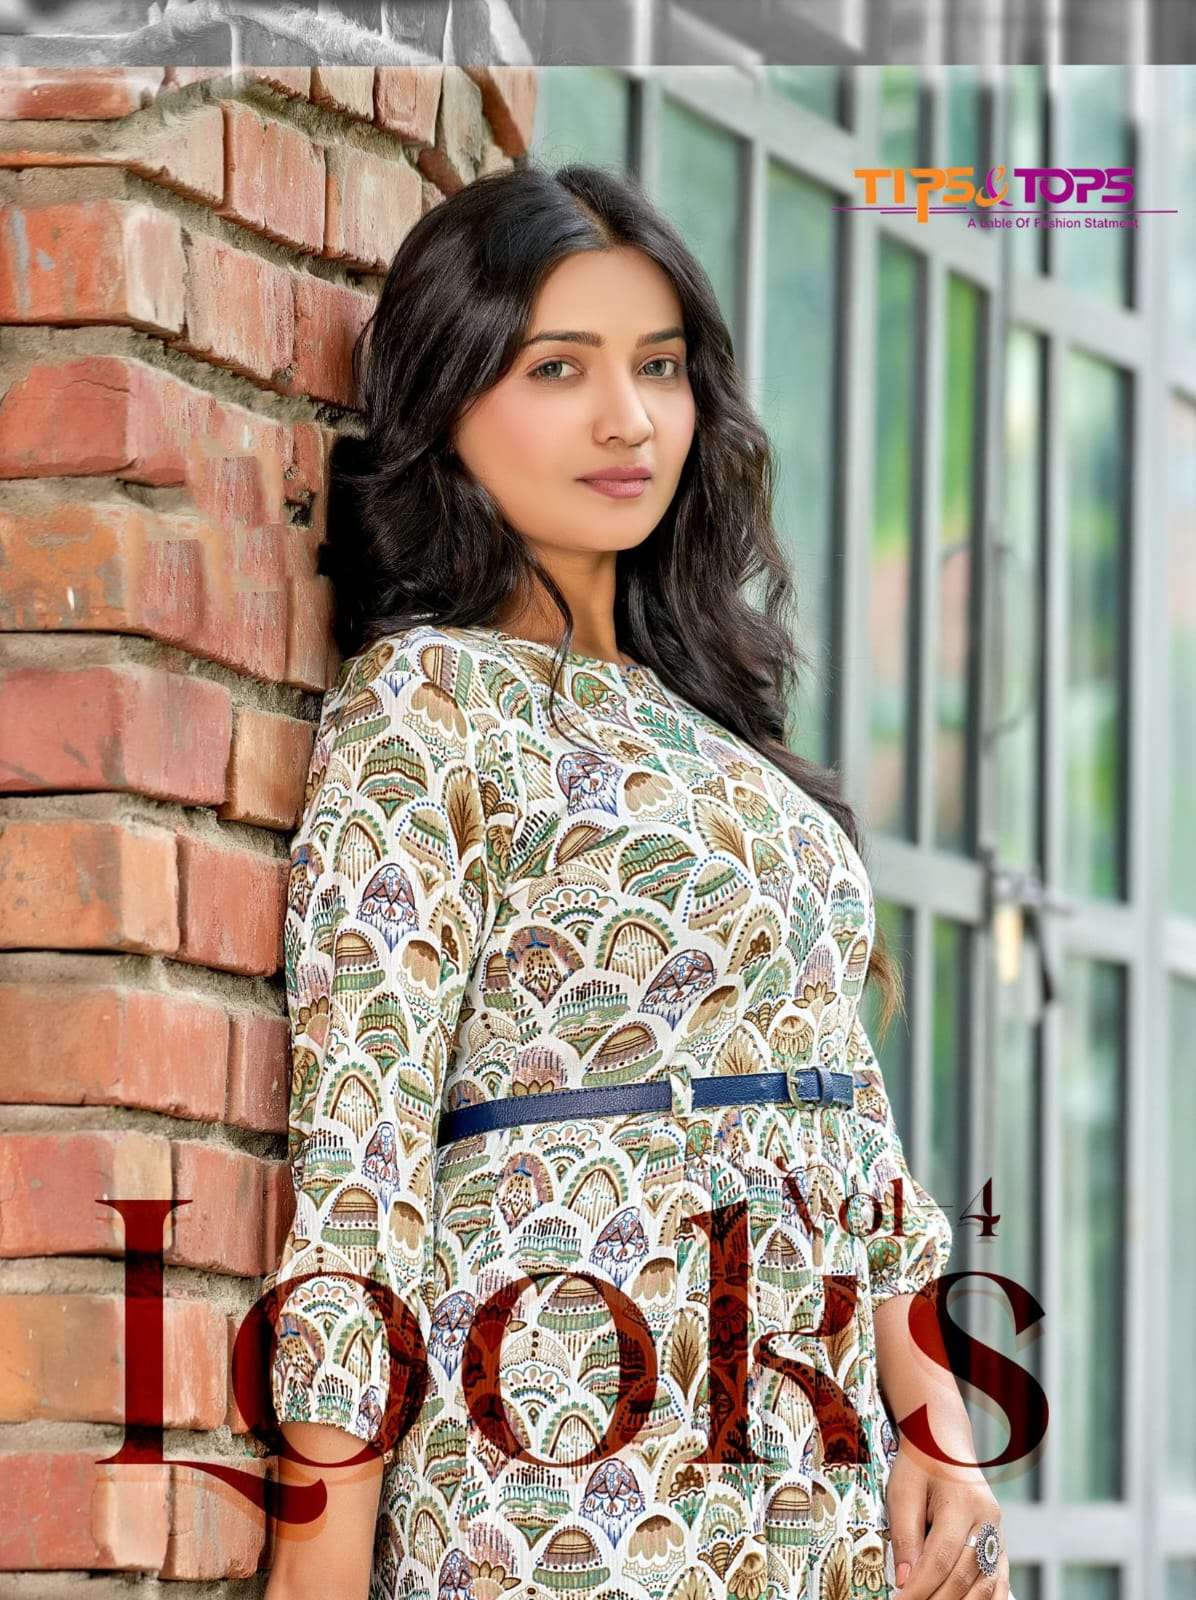 tips and tops looks vol-4 latest designer western short tops catalogue surat 